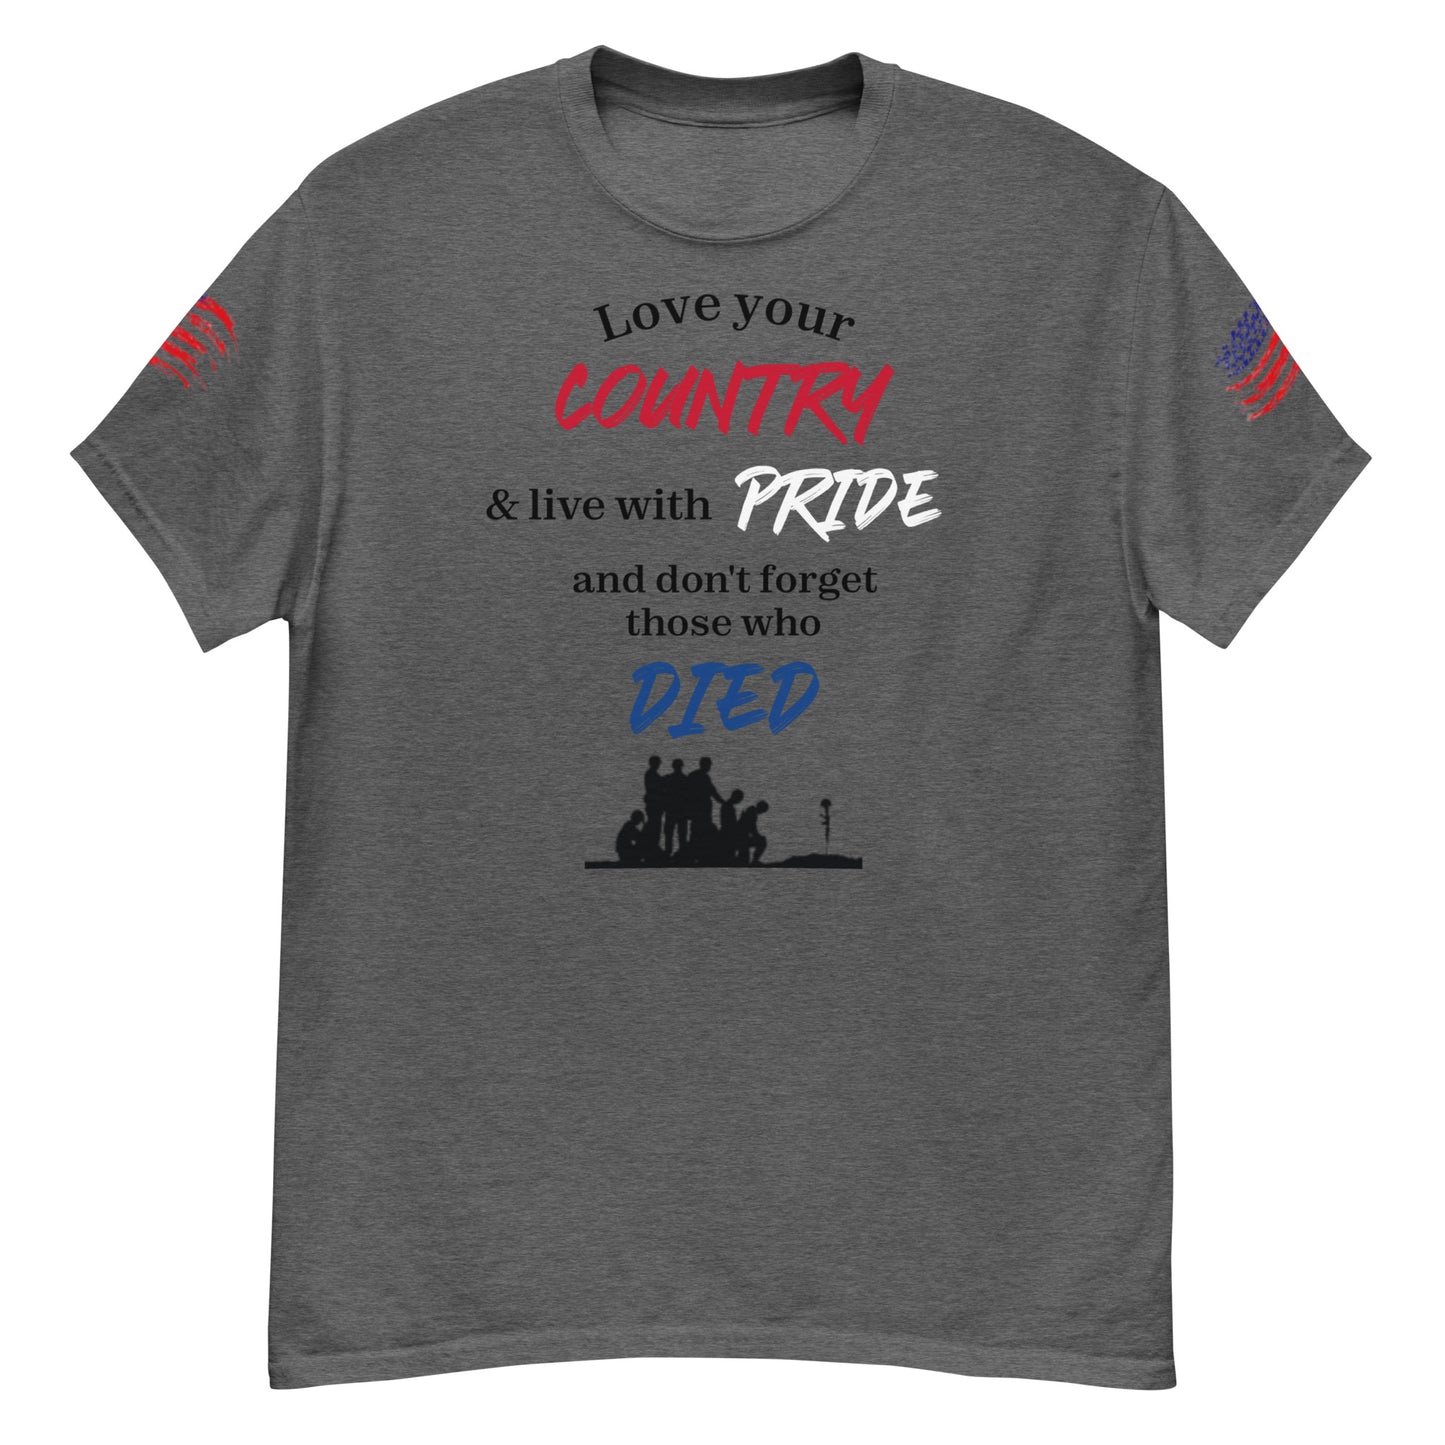 Love your country & live with pride classic tee